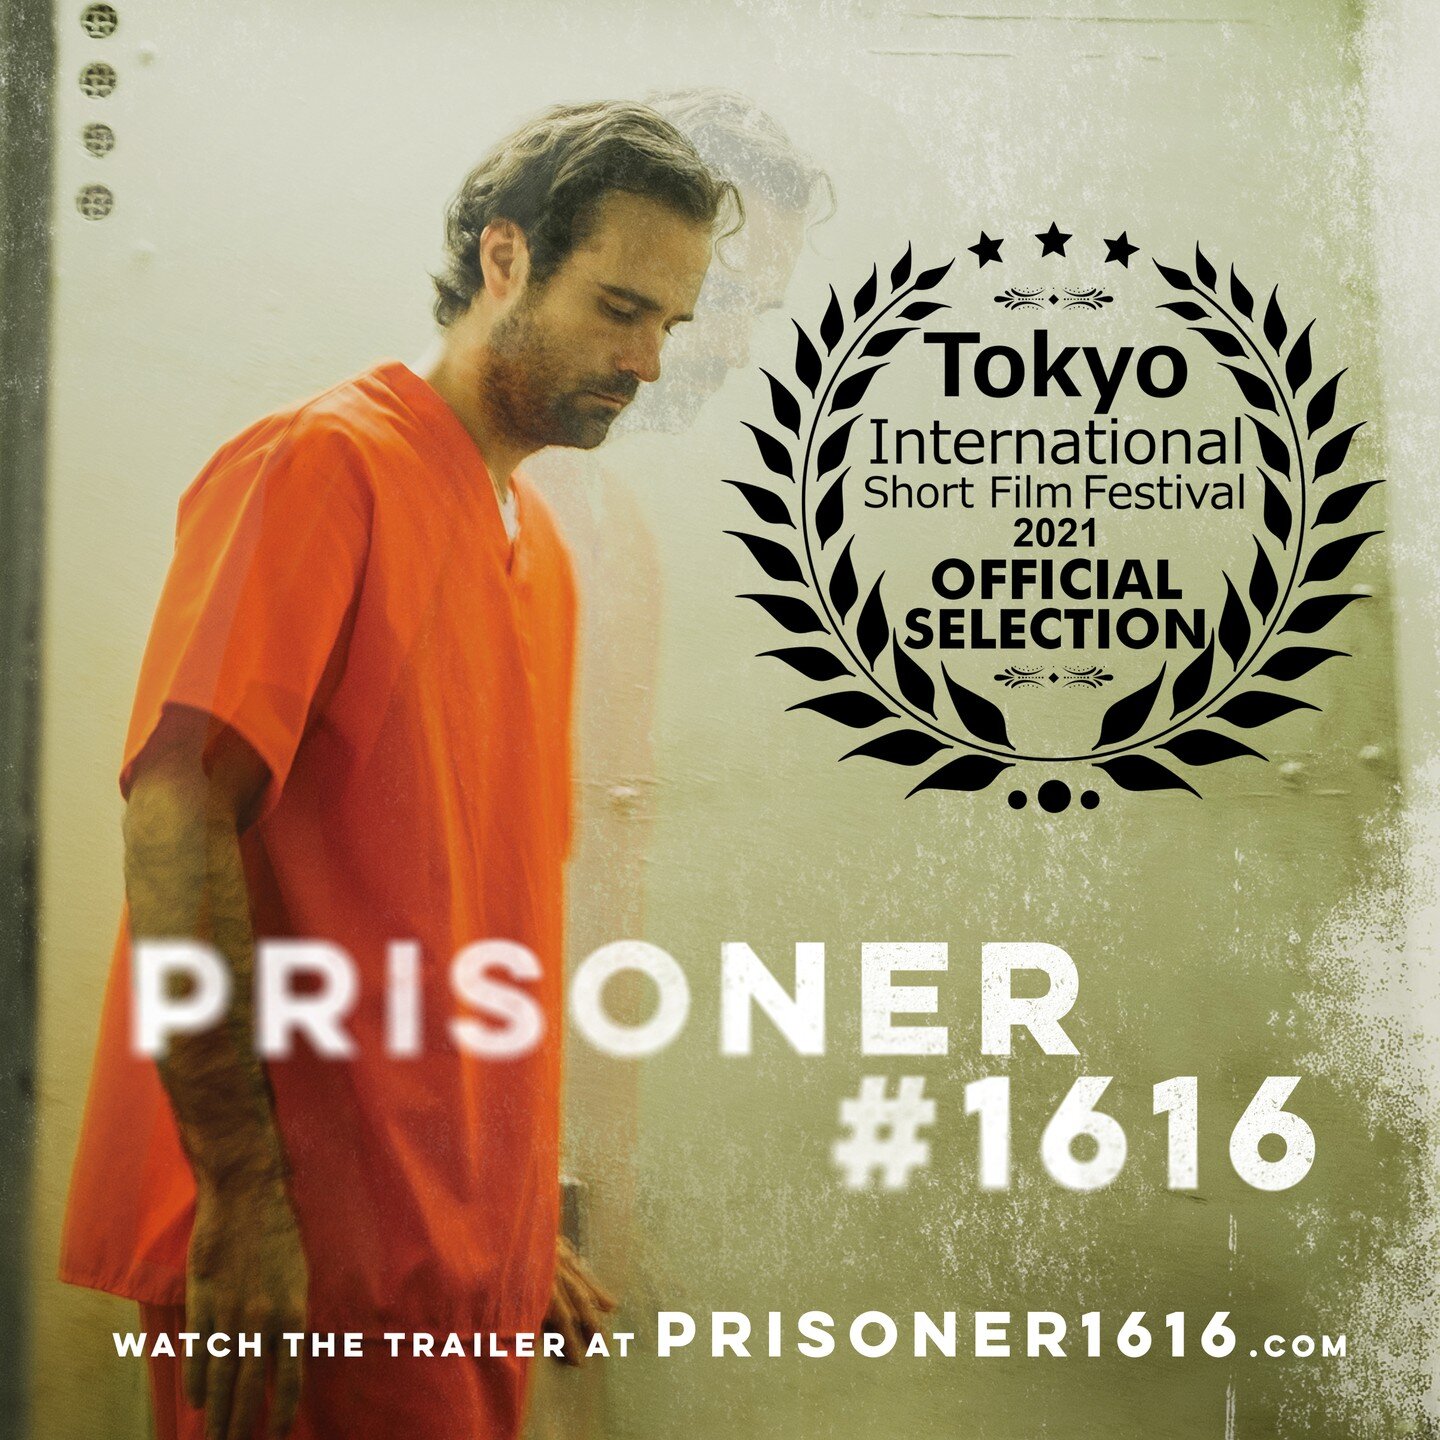 Humbled &amp; thrilled to announce that Prisoner #1616 will be screened among some incredible projects at @tokyoshorts 2021.

#filmfestivalseason #filmfestival #sciencefiction #asiafilm #asiafilmfestival #tokyo #scifi #proofofconcept #shortfilm #dire